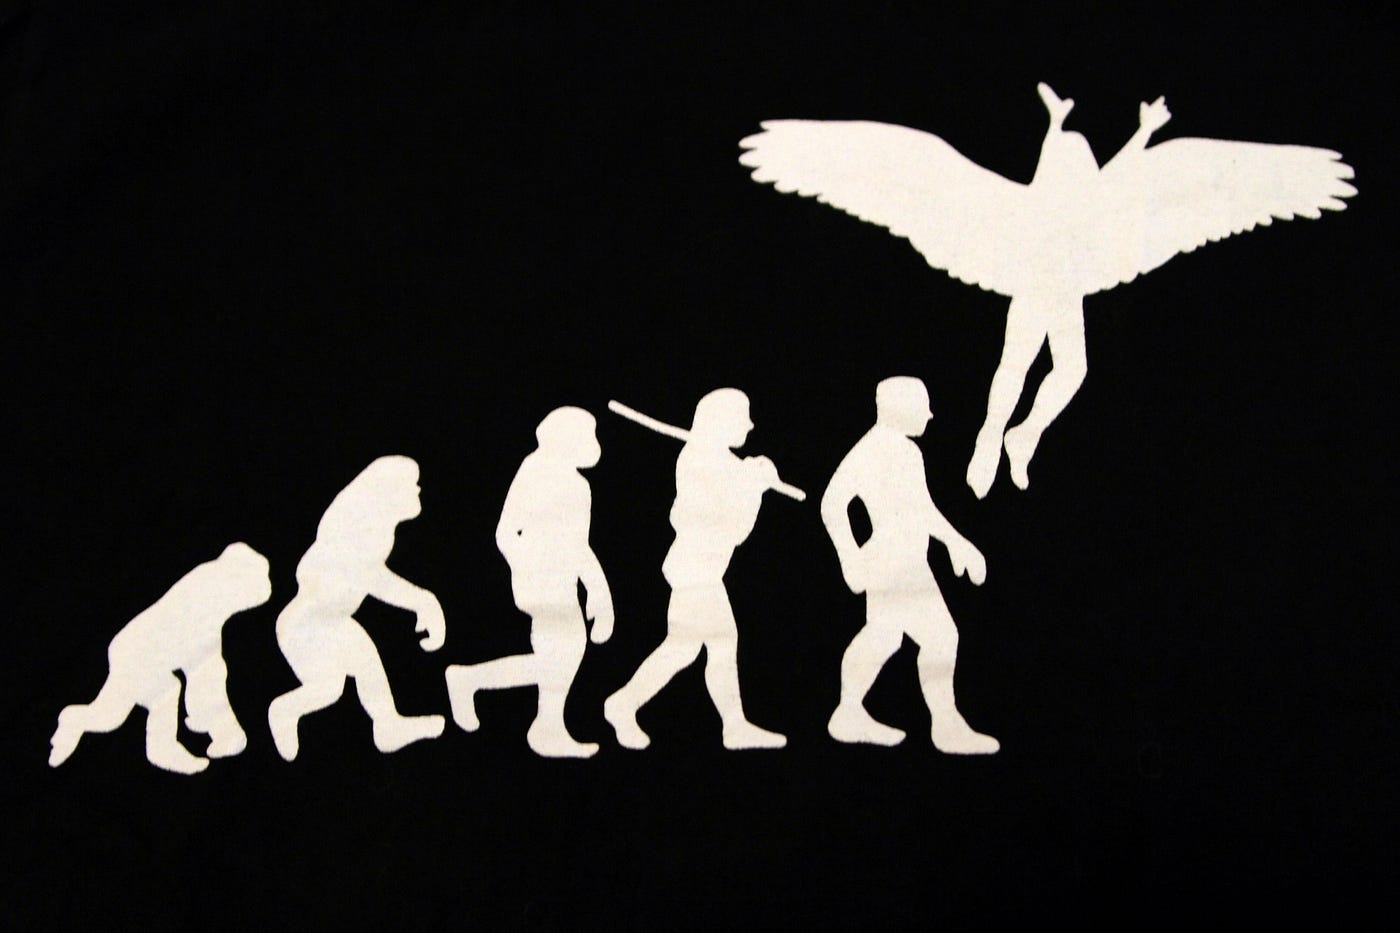 Black and white illustration of human evolution in black and white with final illustration having wings.